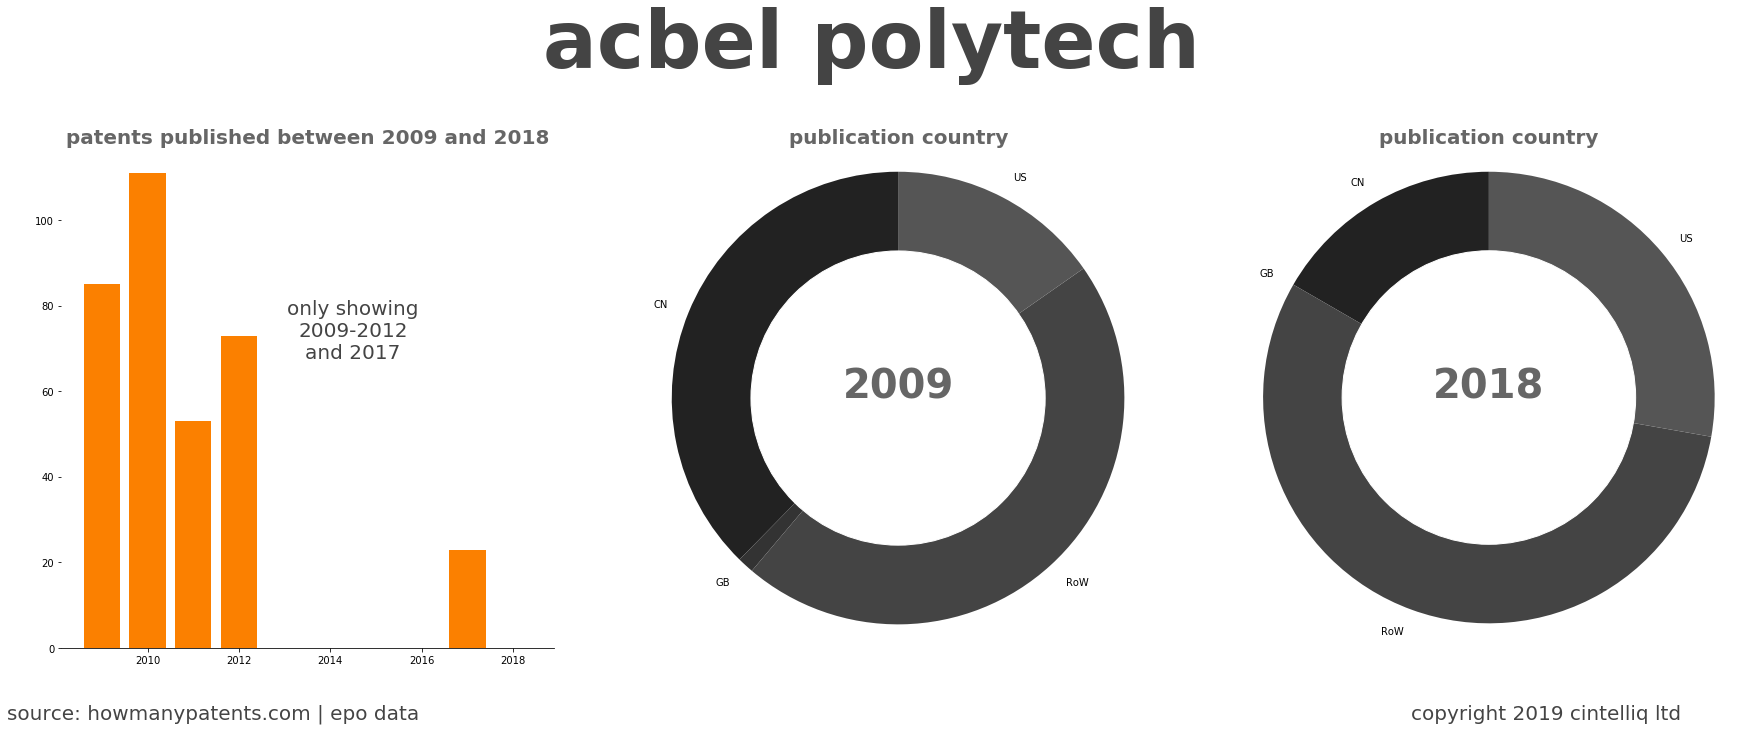 summary of patents for Acbel Polytech